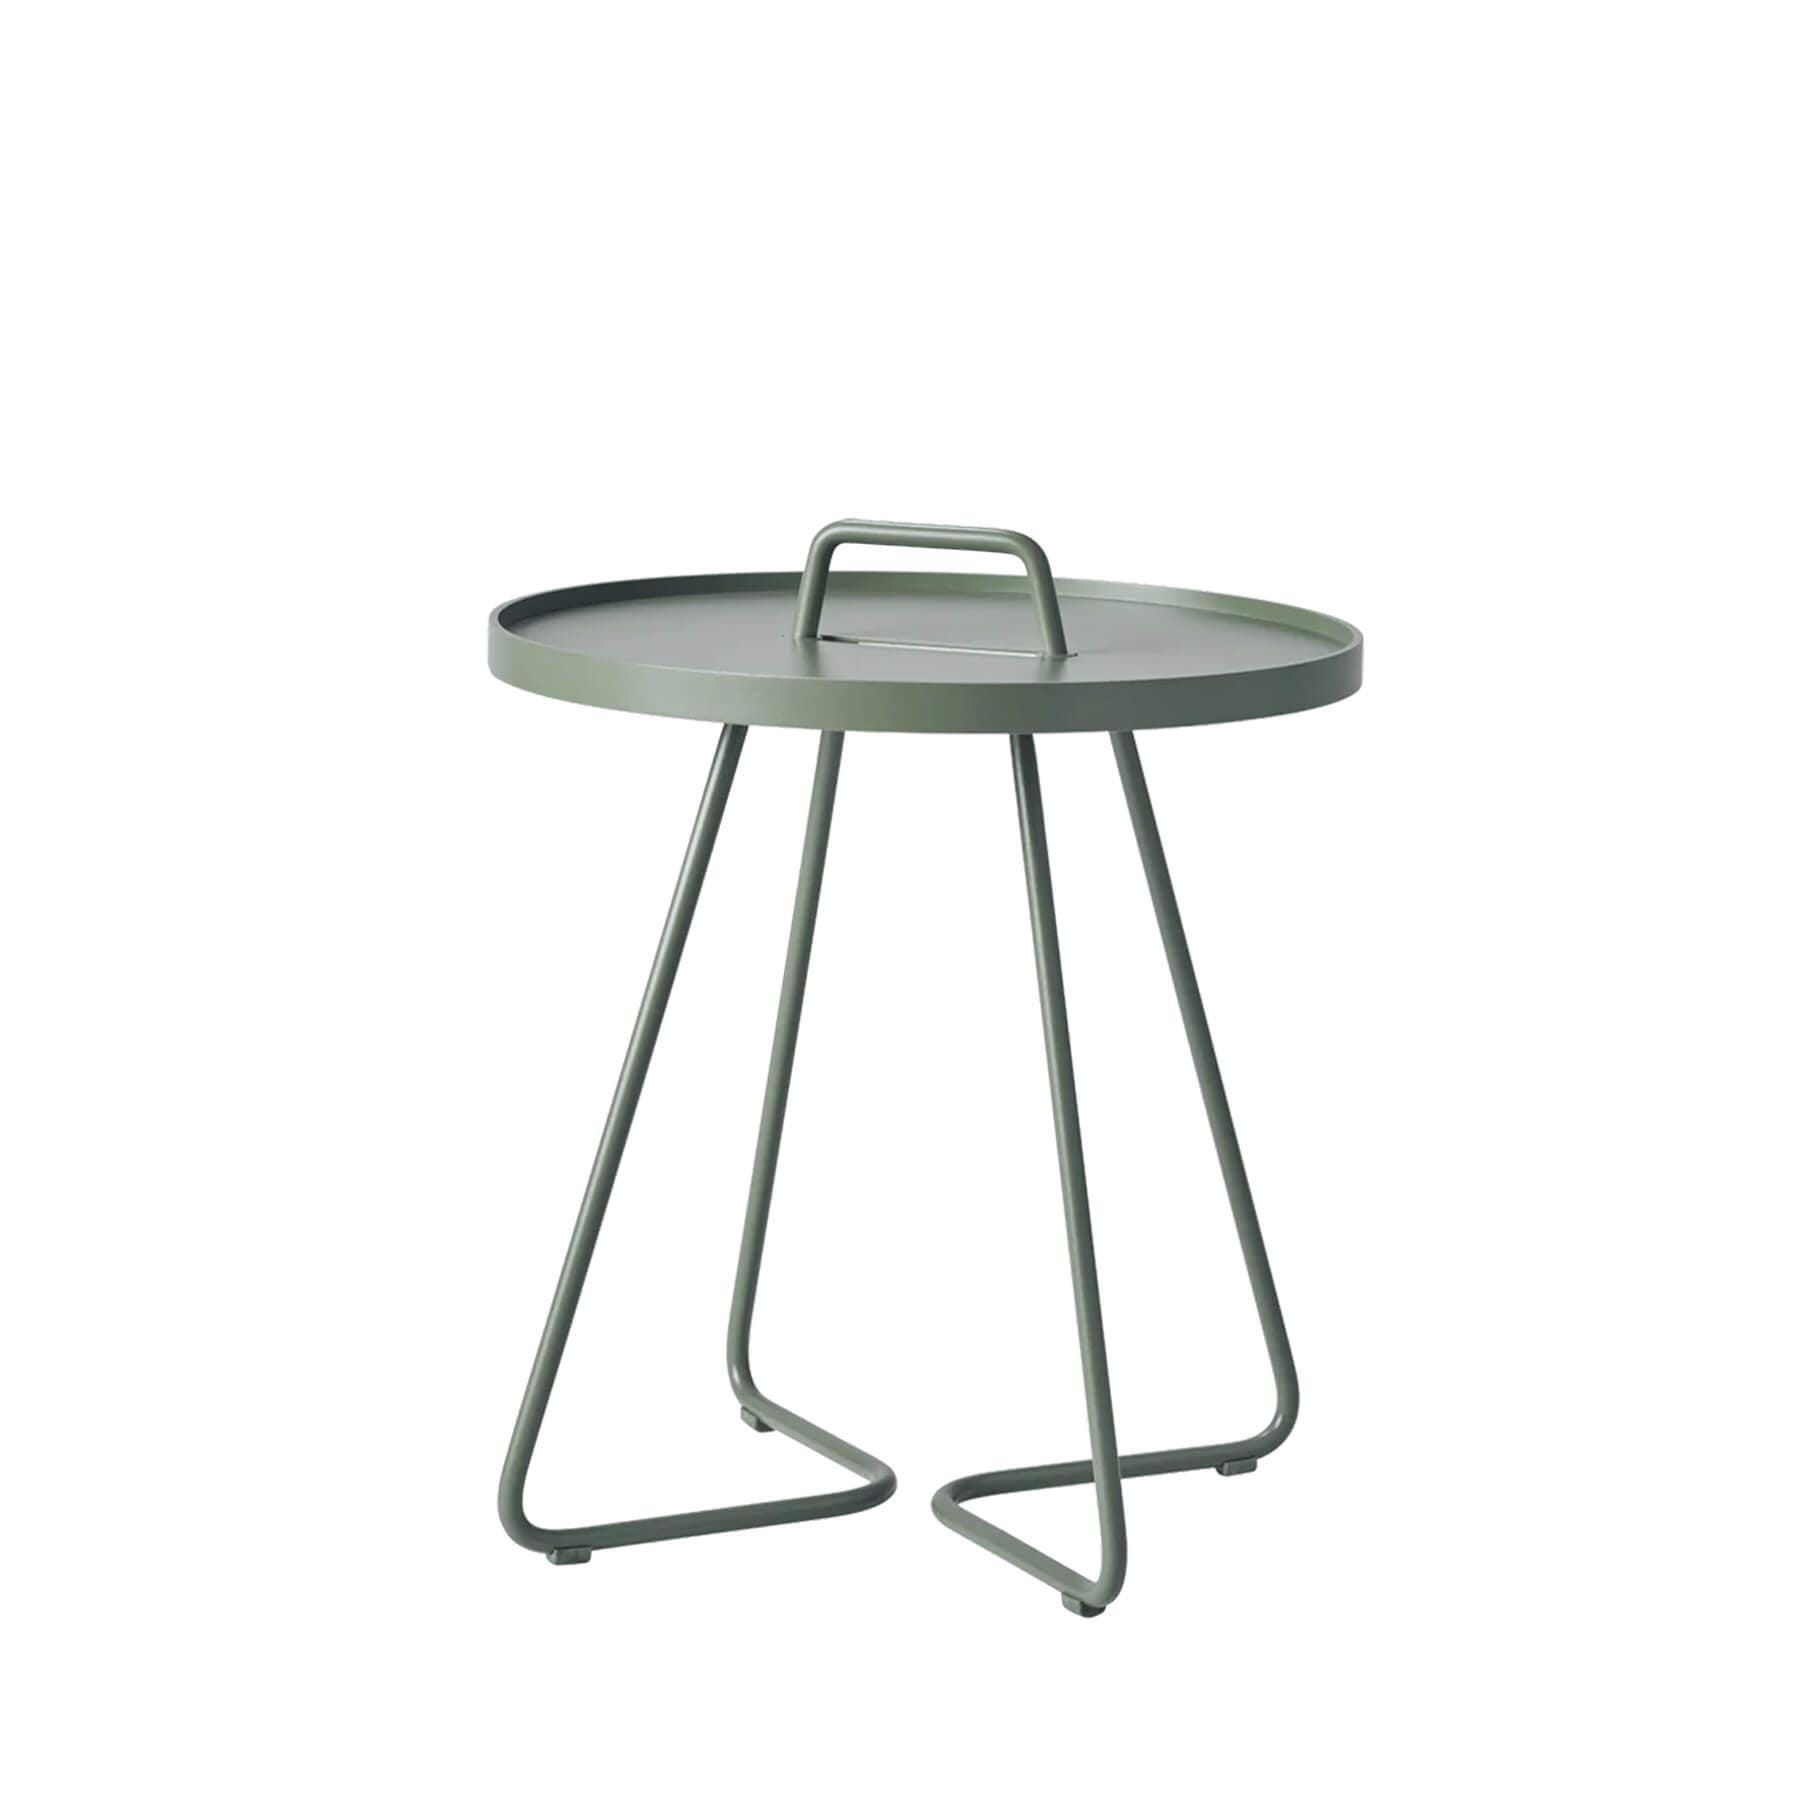 Caneline On The Move Side Table Small Dusty Green Designer Furniture From Holloways Of Ludlow